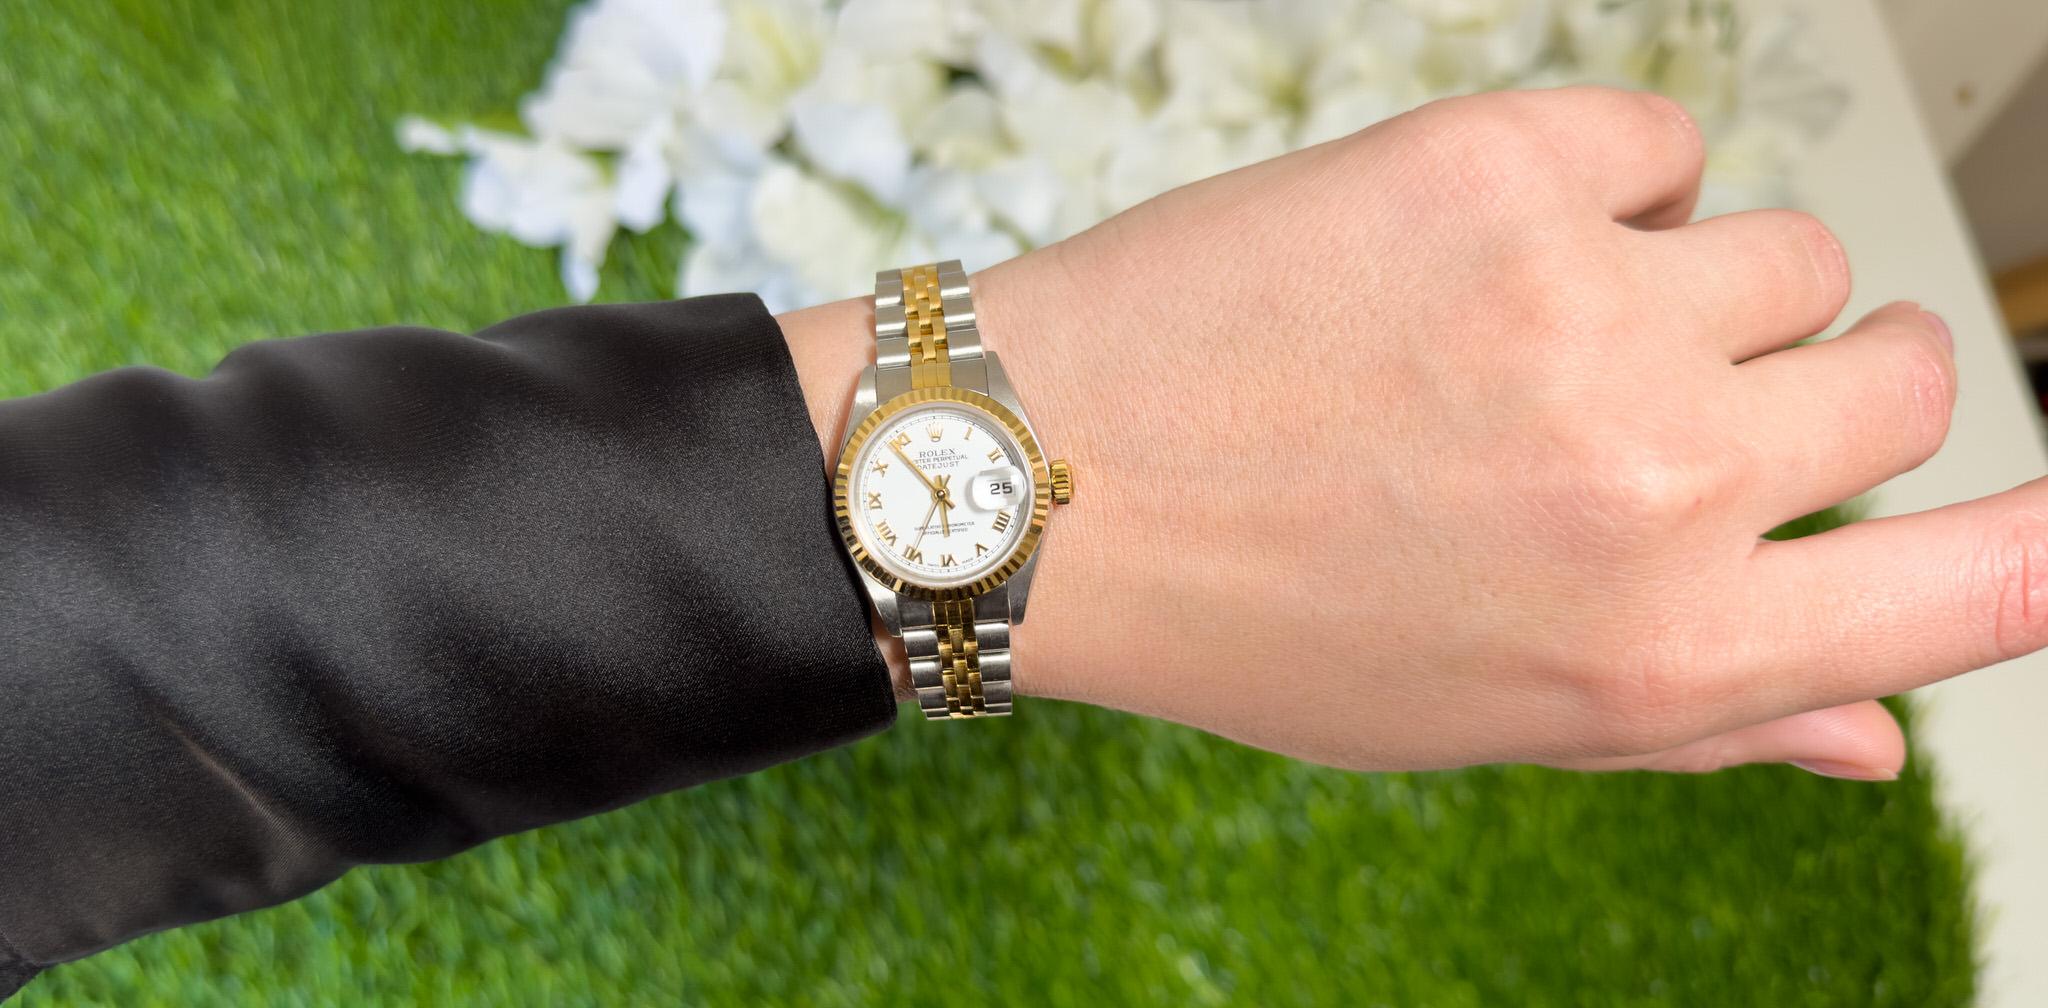 It comes with the Authenticity Certificate by GIA GG/AJP and Rolex Tag
Condition: Excellent
Brand: Rolex
Model: Lady-Datejust
Reference Number: 79173
Circa 2002
Movement: Automatic
Functions: Date, Time
Dial: White with Roman Numerals
Case Material: